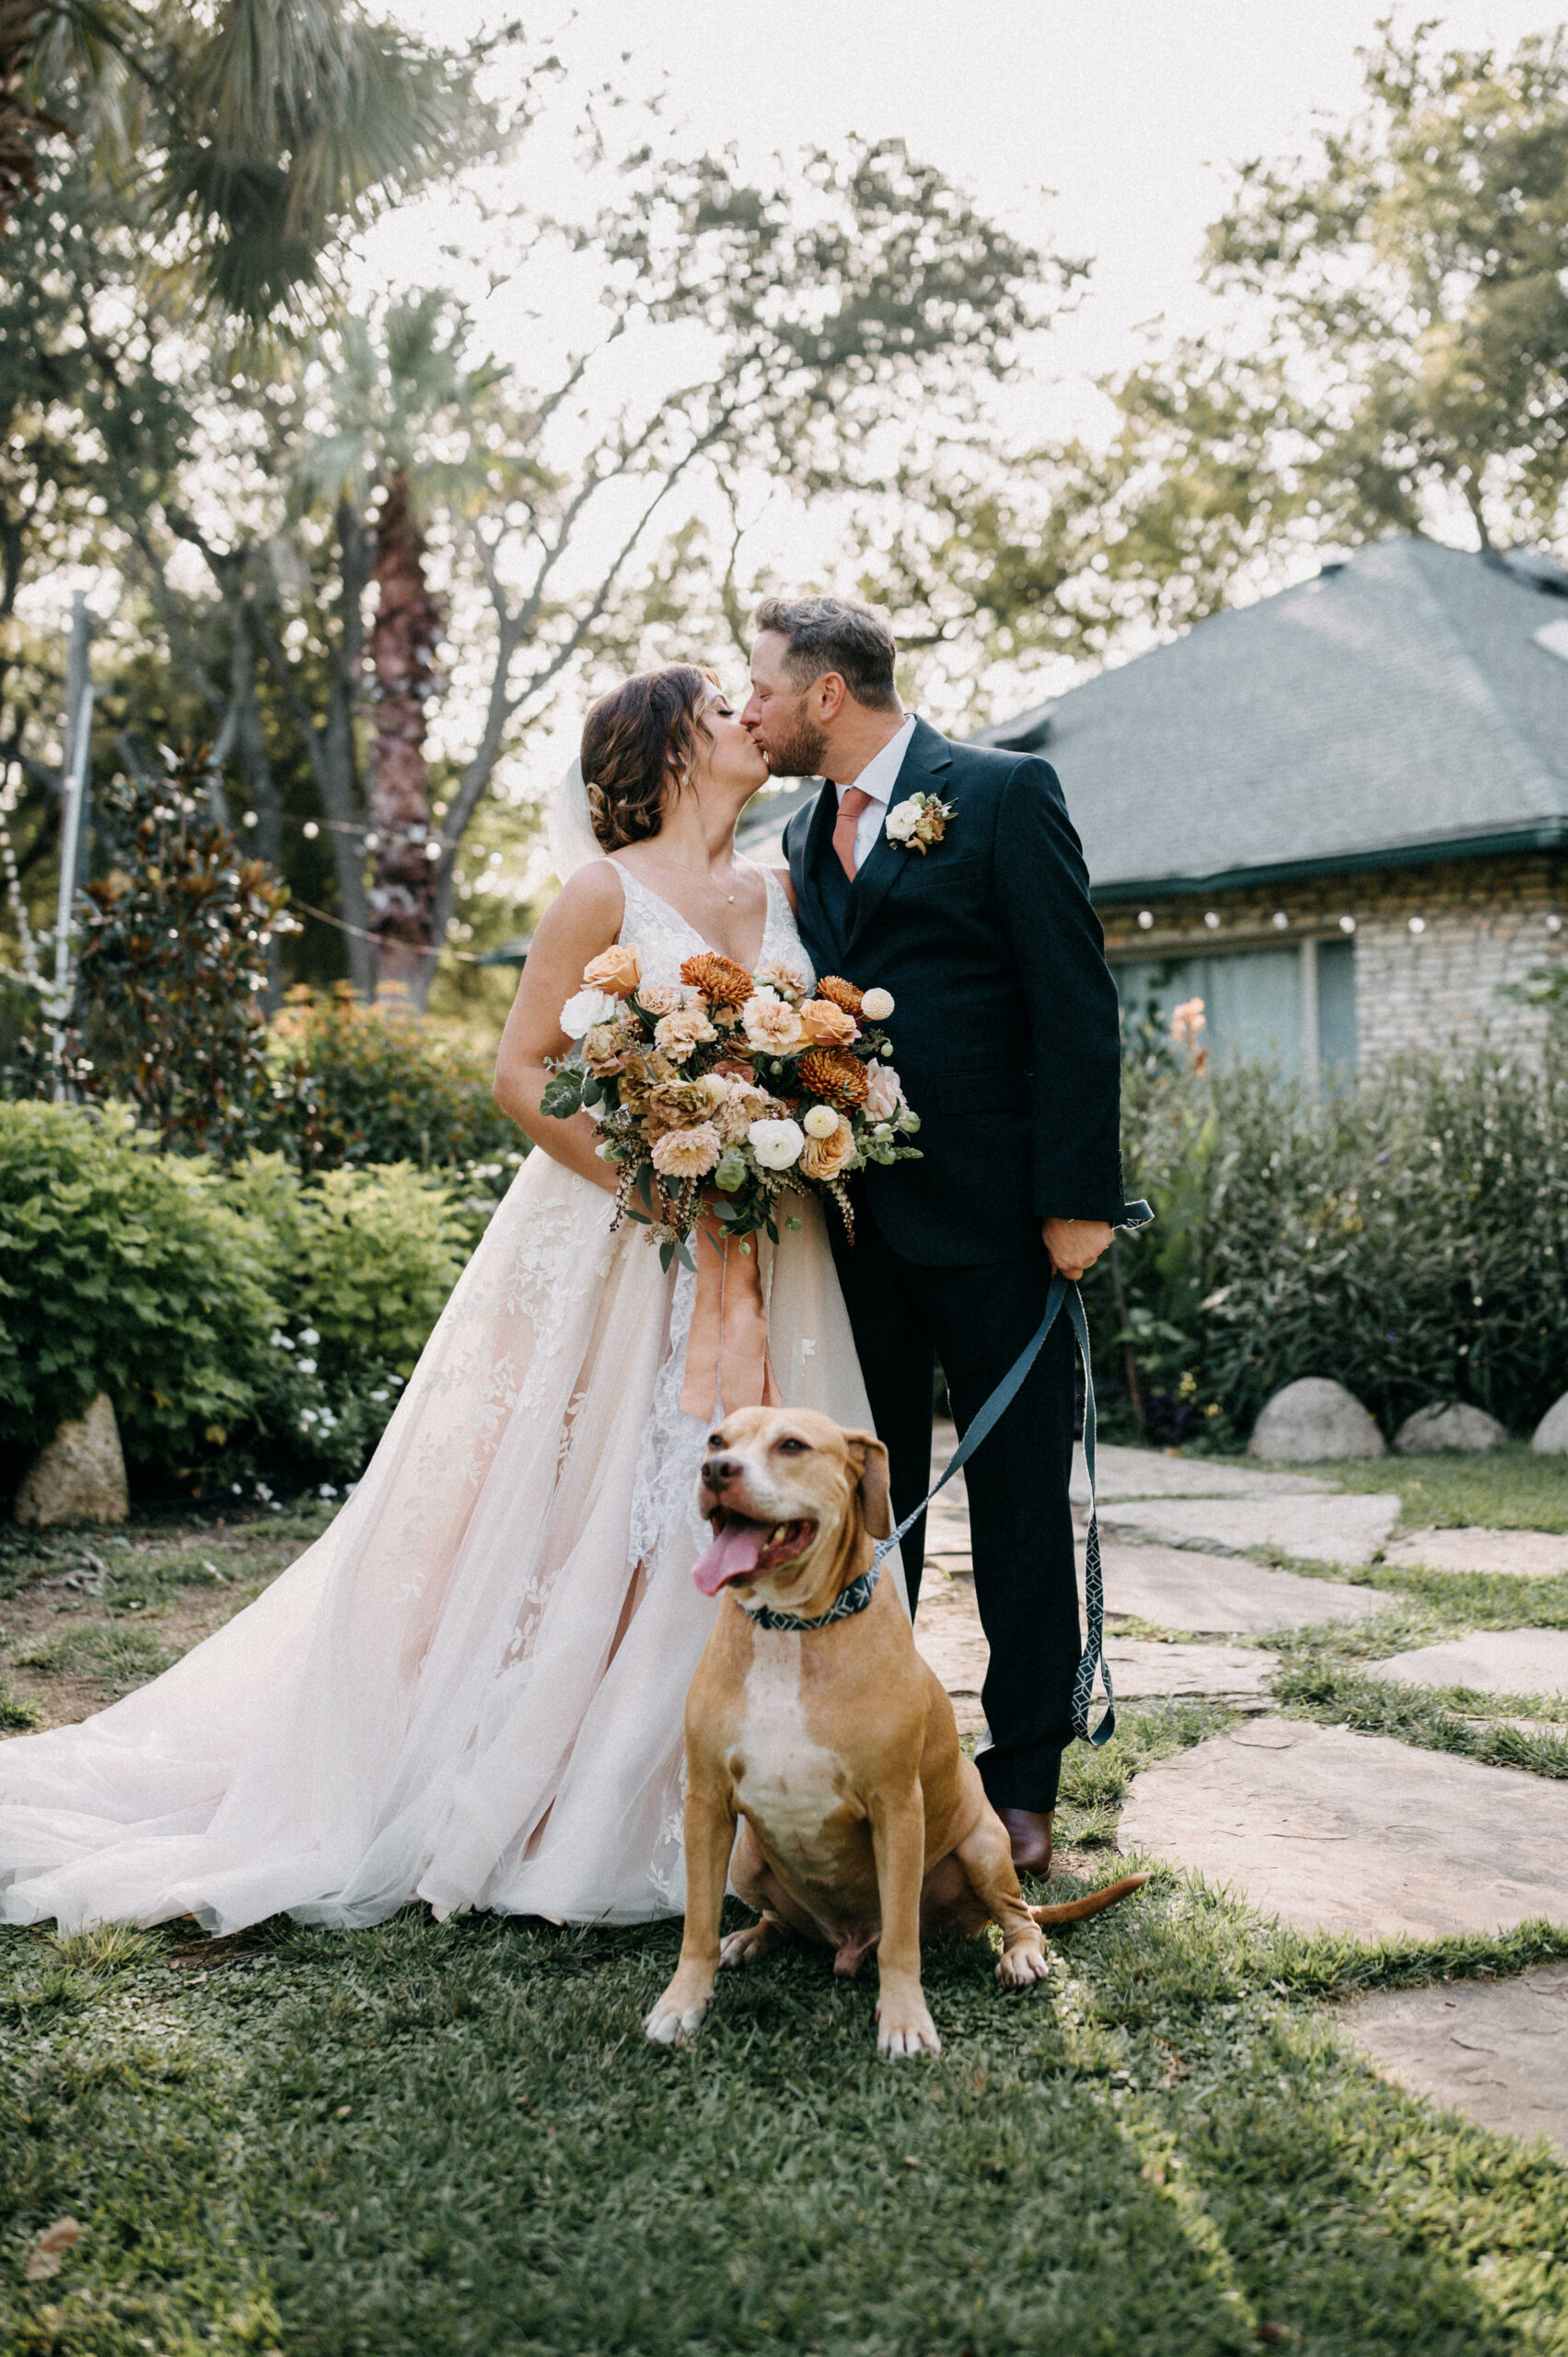 Bride and groom kissing with their dog on wedding day